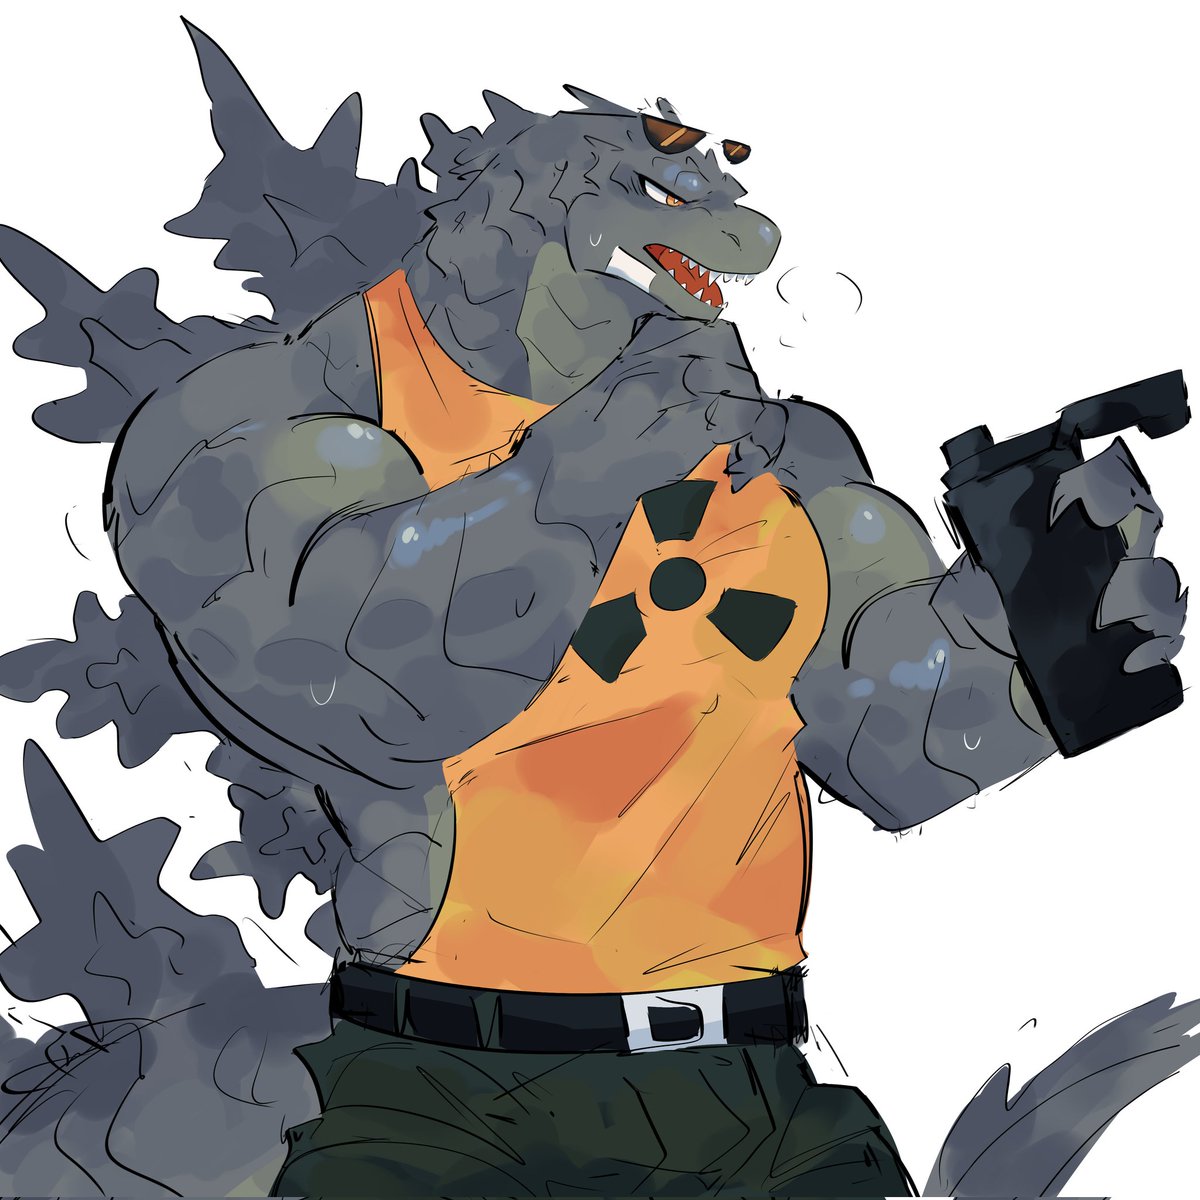 I'm happy godzilla is becoming popular again so here's a repost